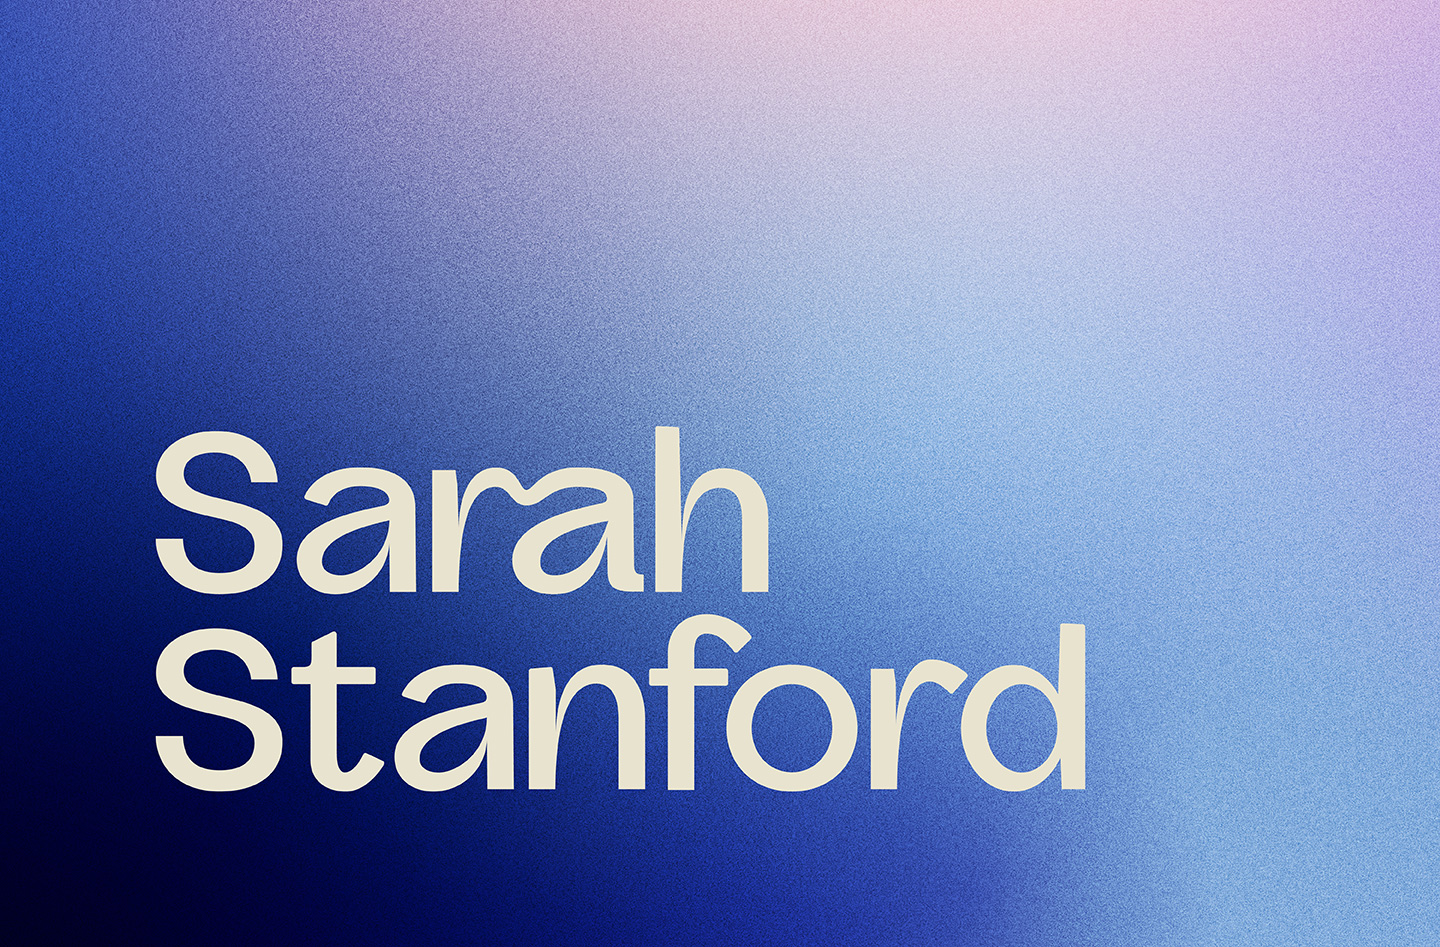 Rebranding case study thumbnail for Sarah Stanford showing the sans serif logo on a purple and blue gradient background